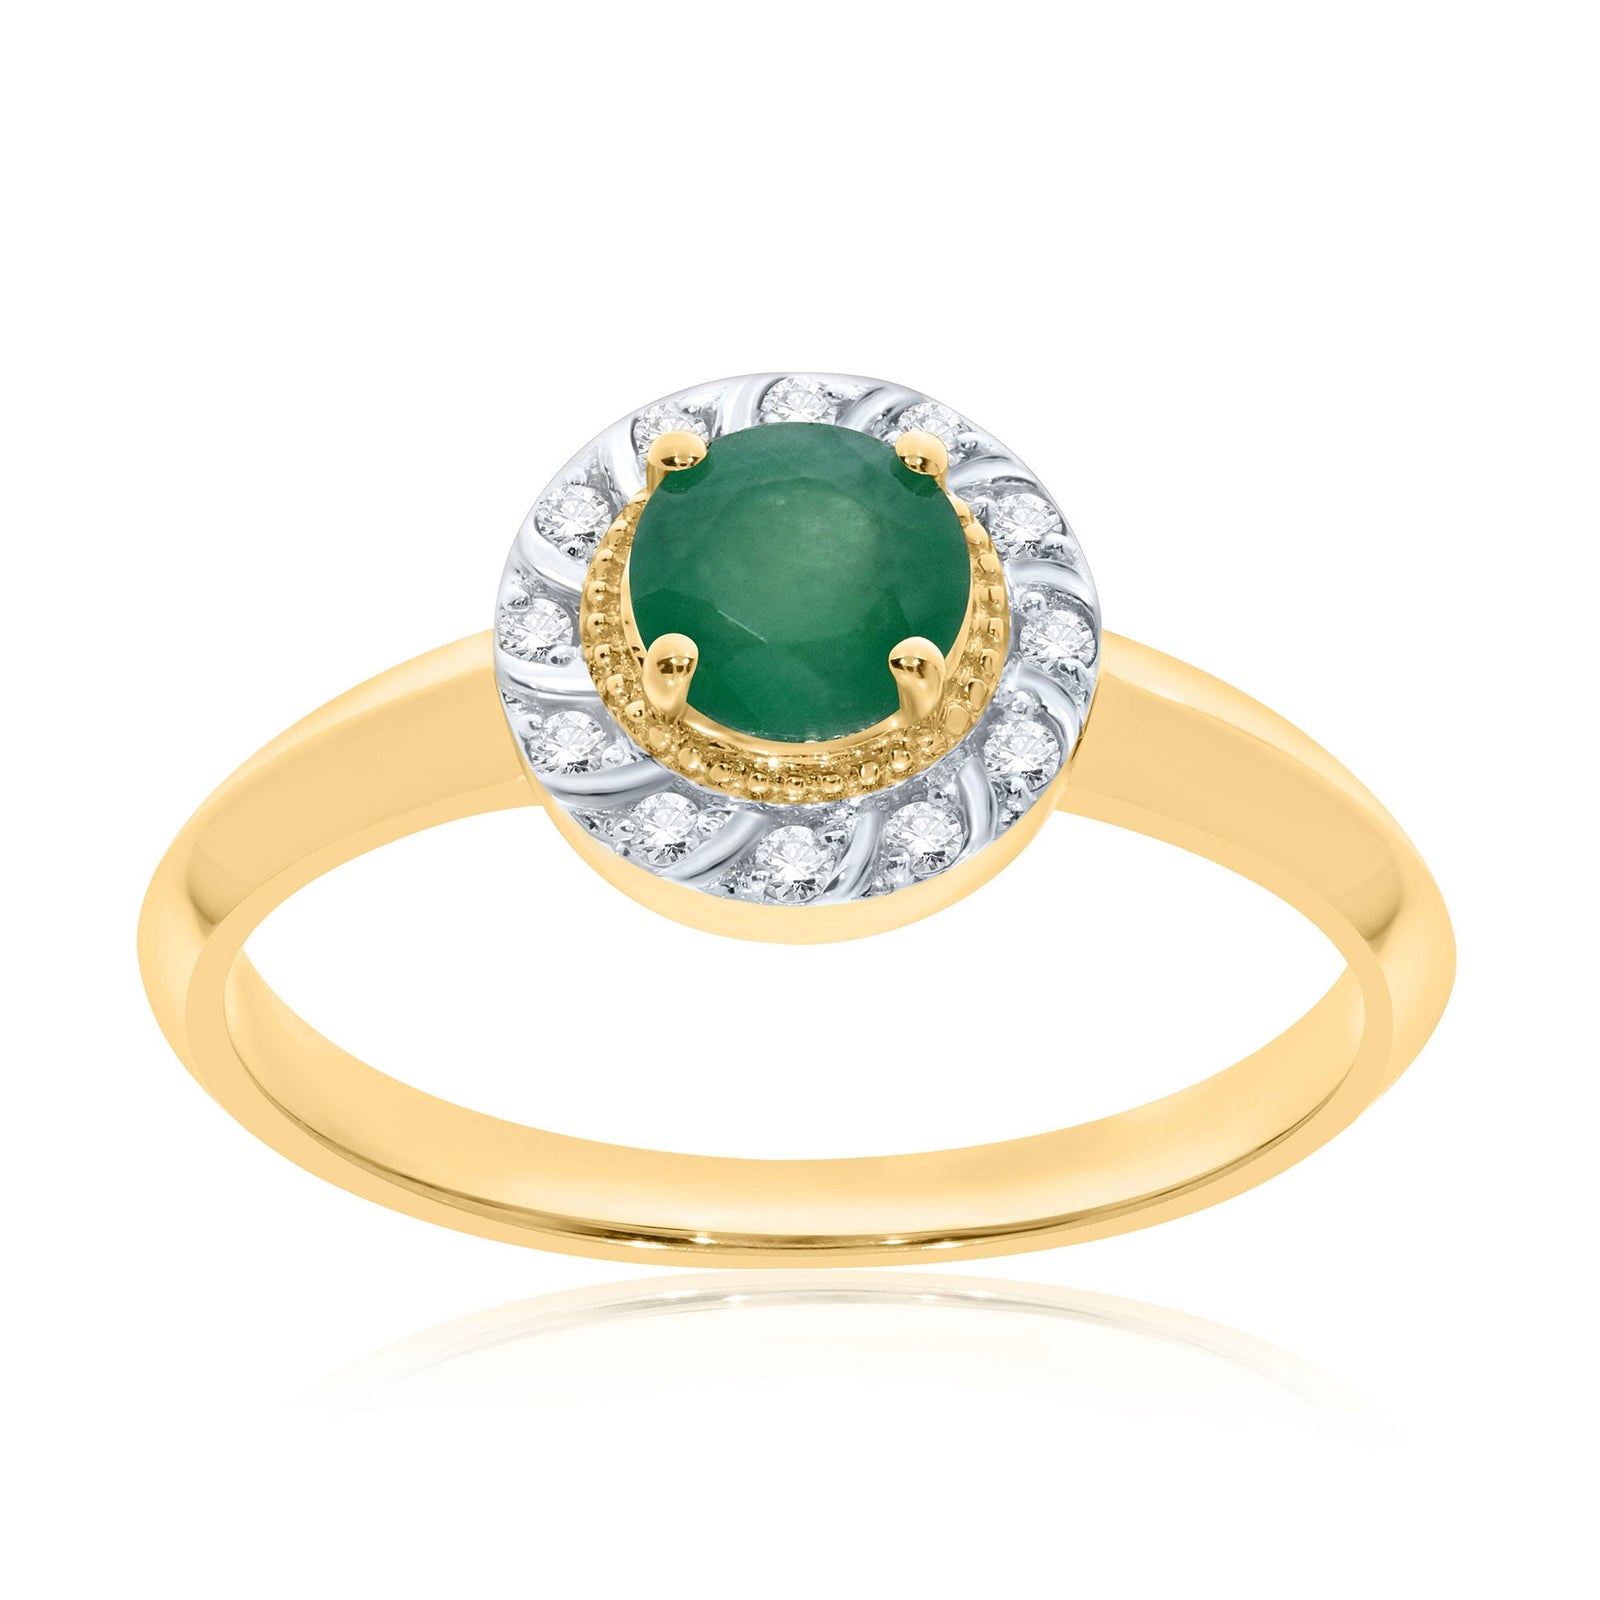 9ct gold 5mm round emerald & diamond cluster ring 0.08ct